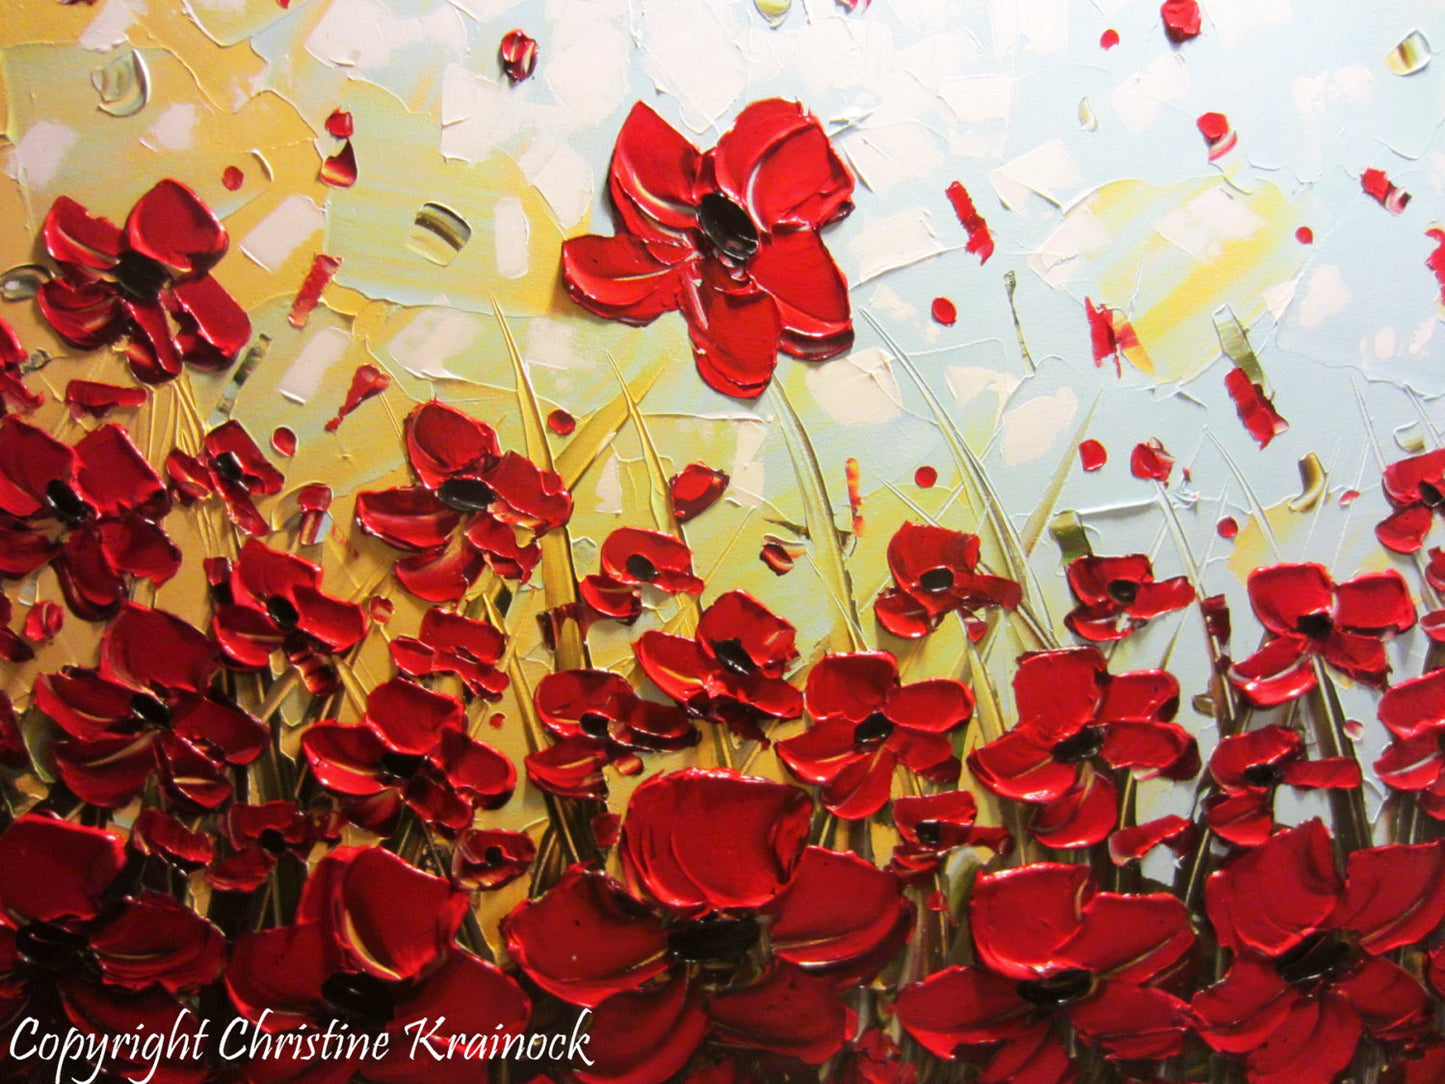 ORIGINAL Art Abstract Painting Red Poppy Flowers Large Textured Landsc ...